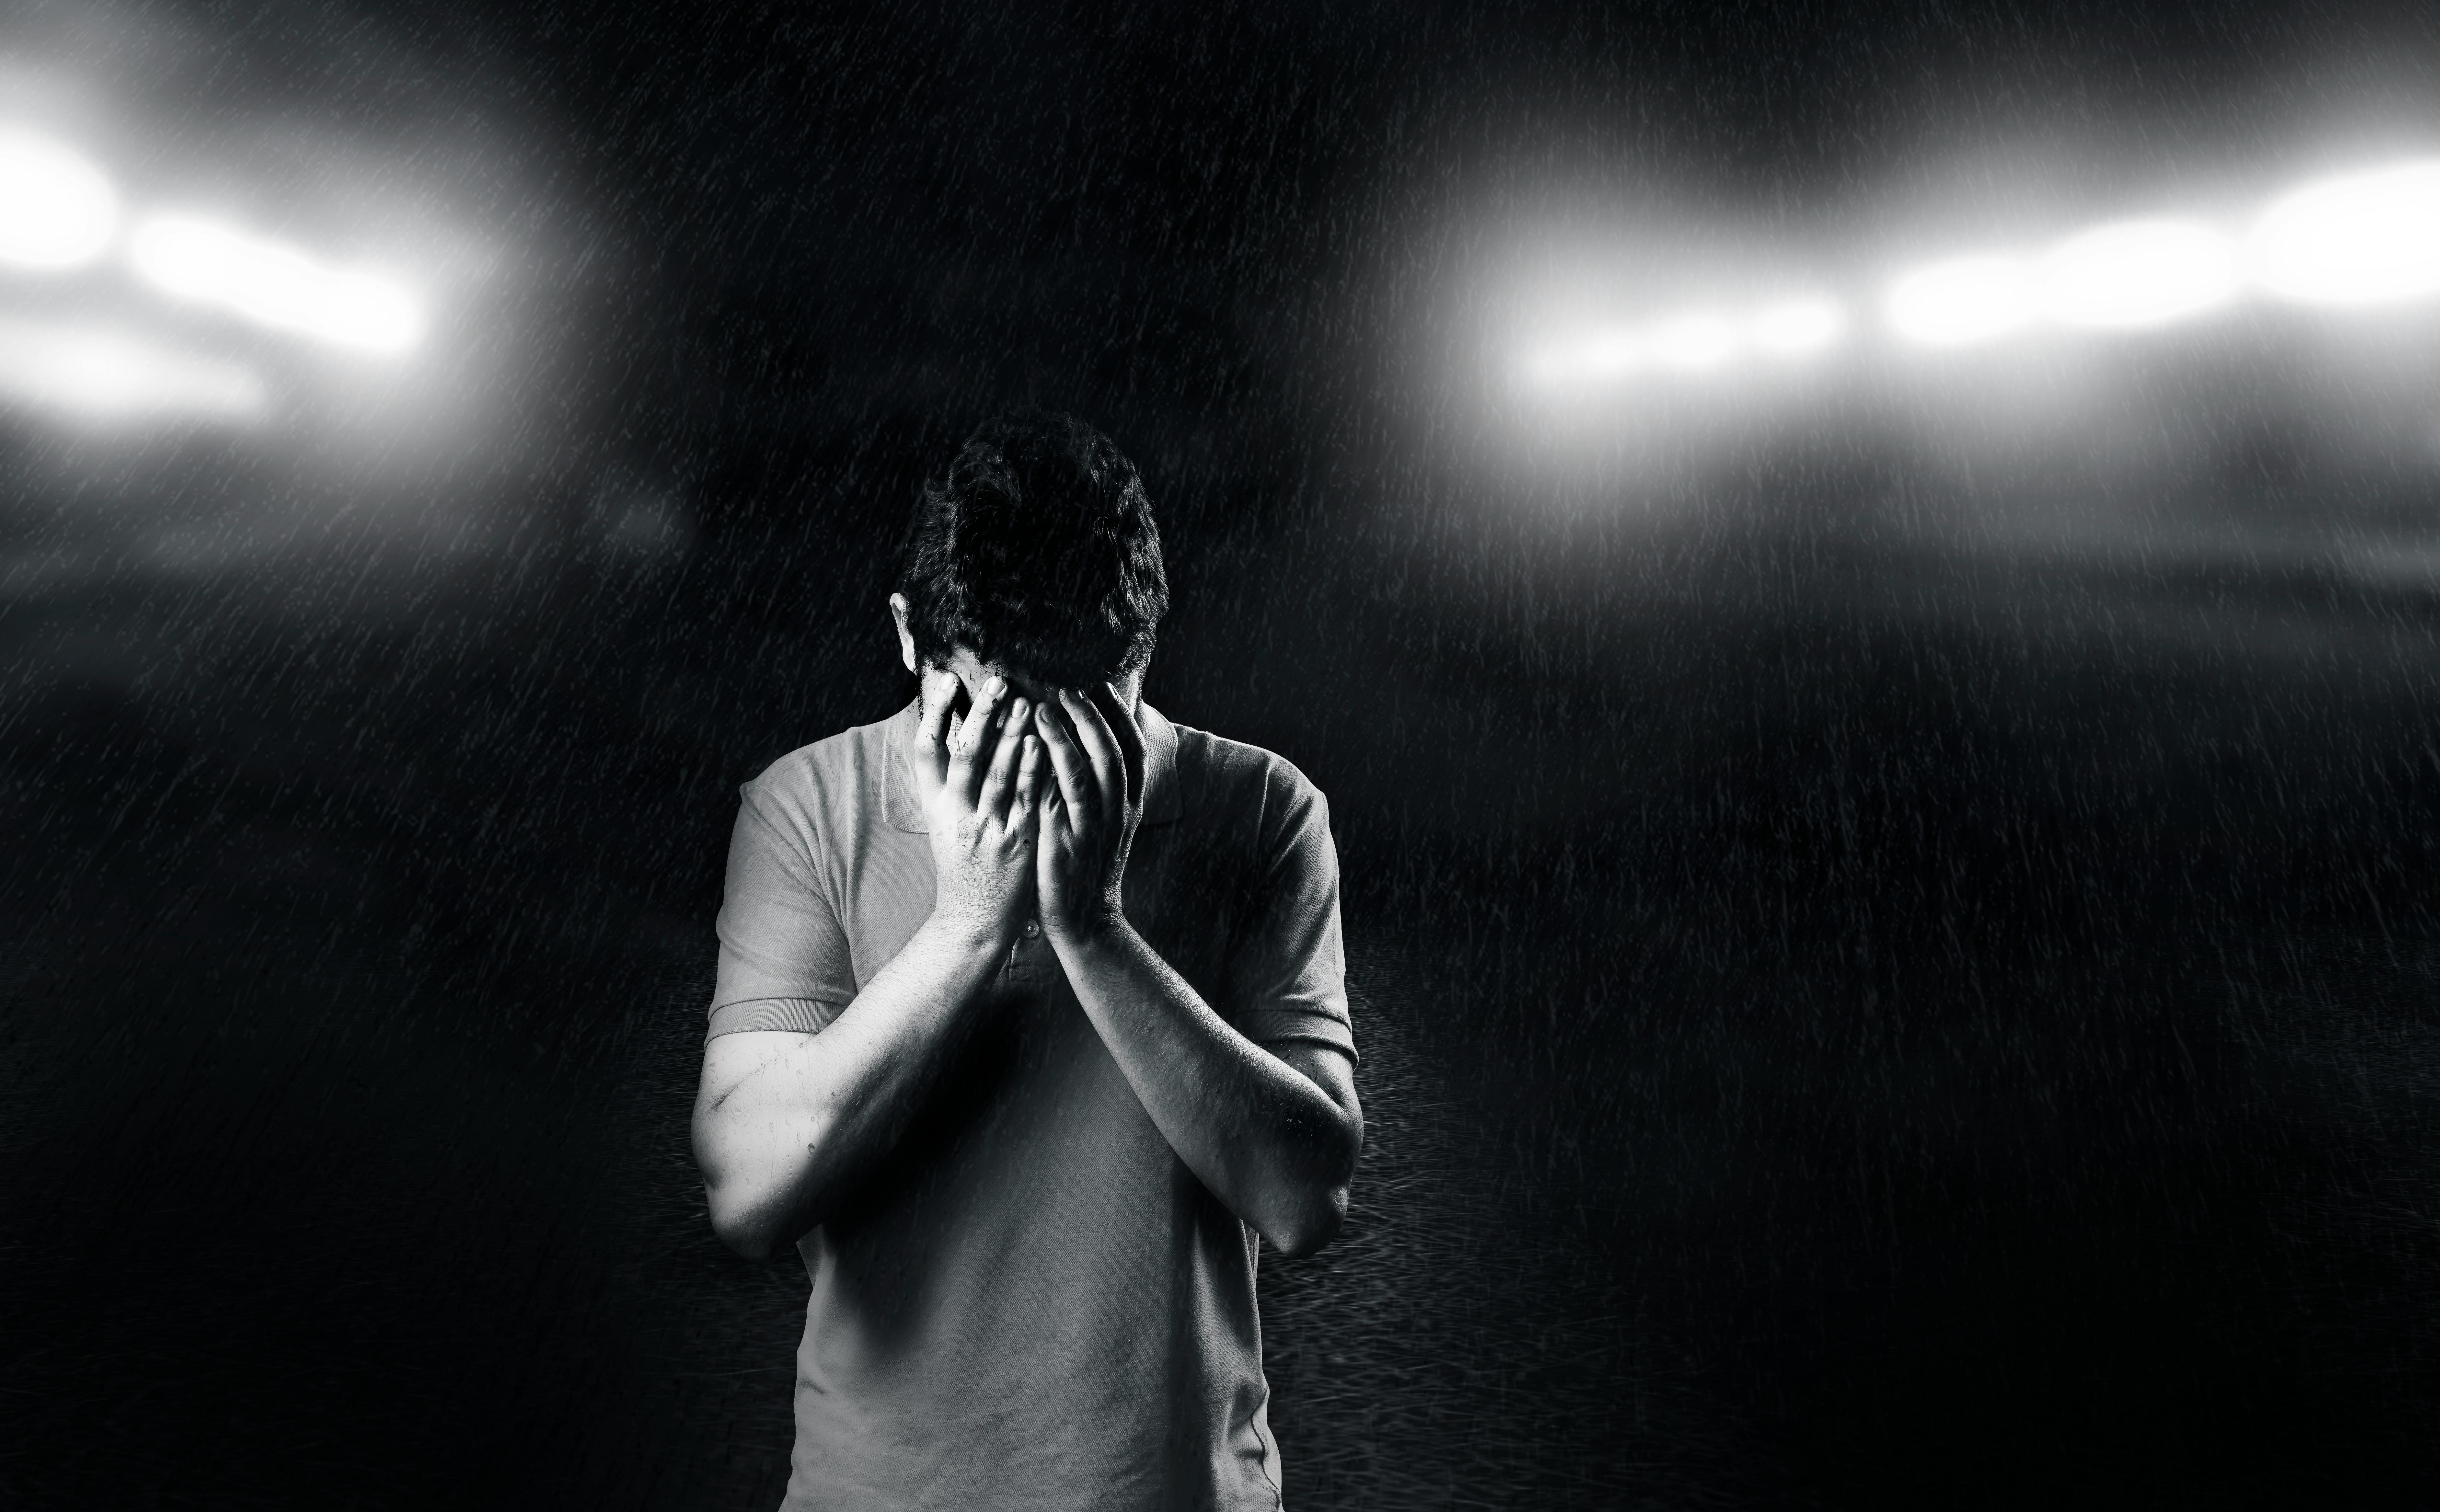 Monochrome photo of a man covering his face | Source: Pexels